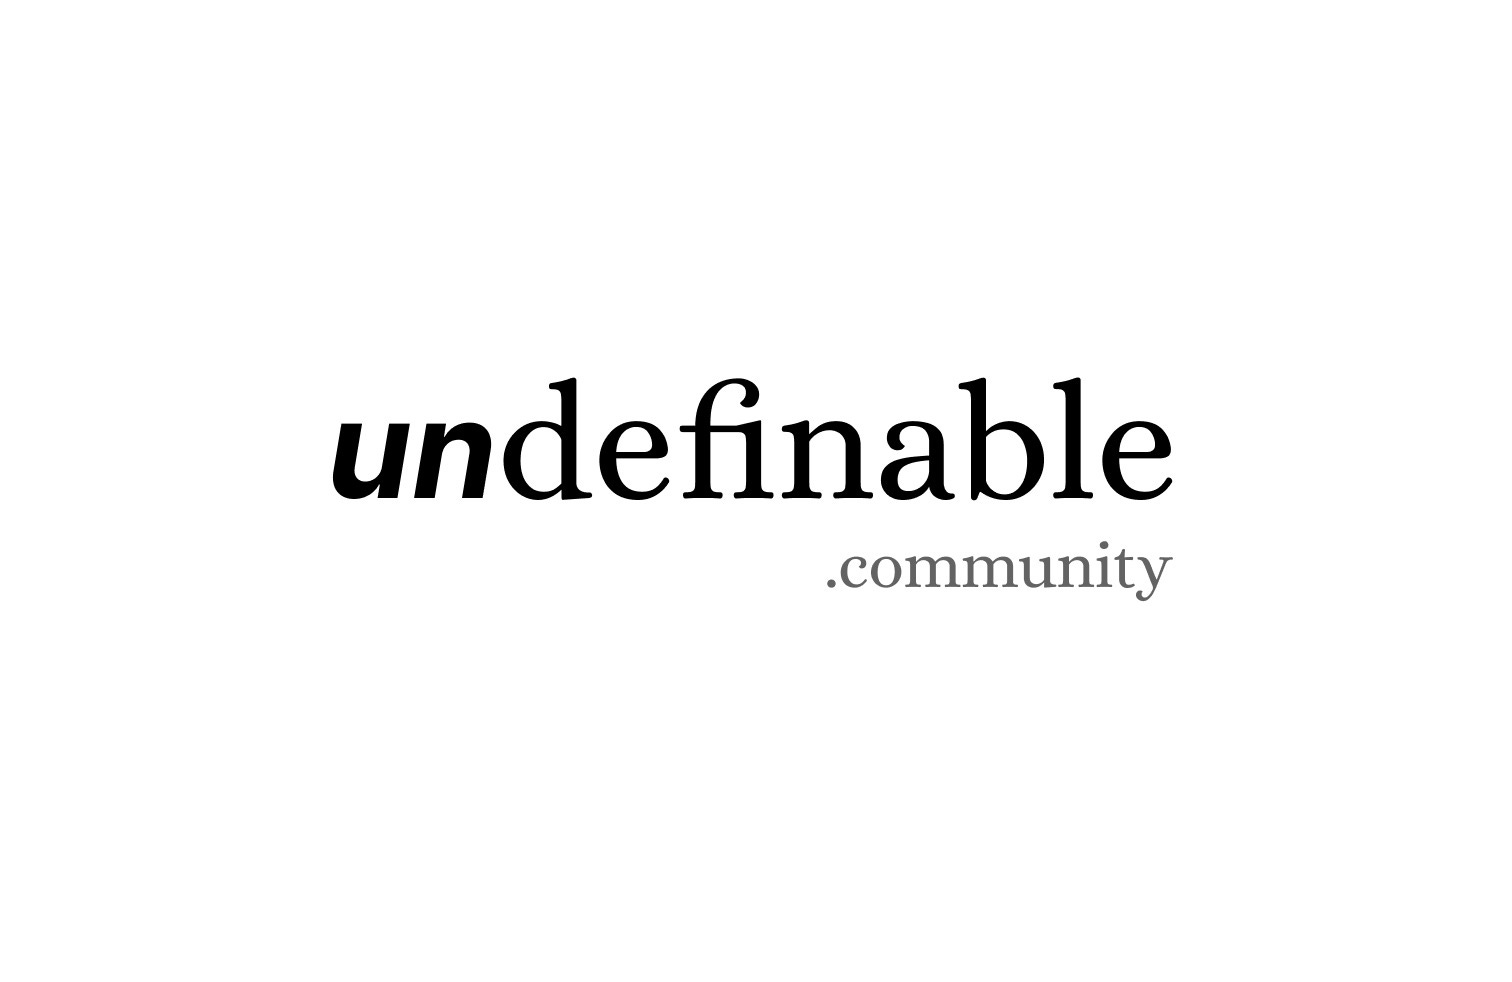 Artwork for Undefinable Publications